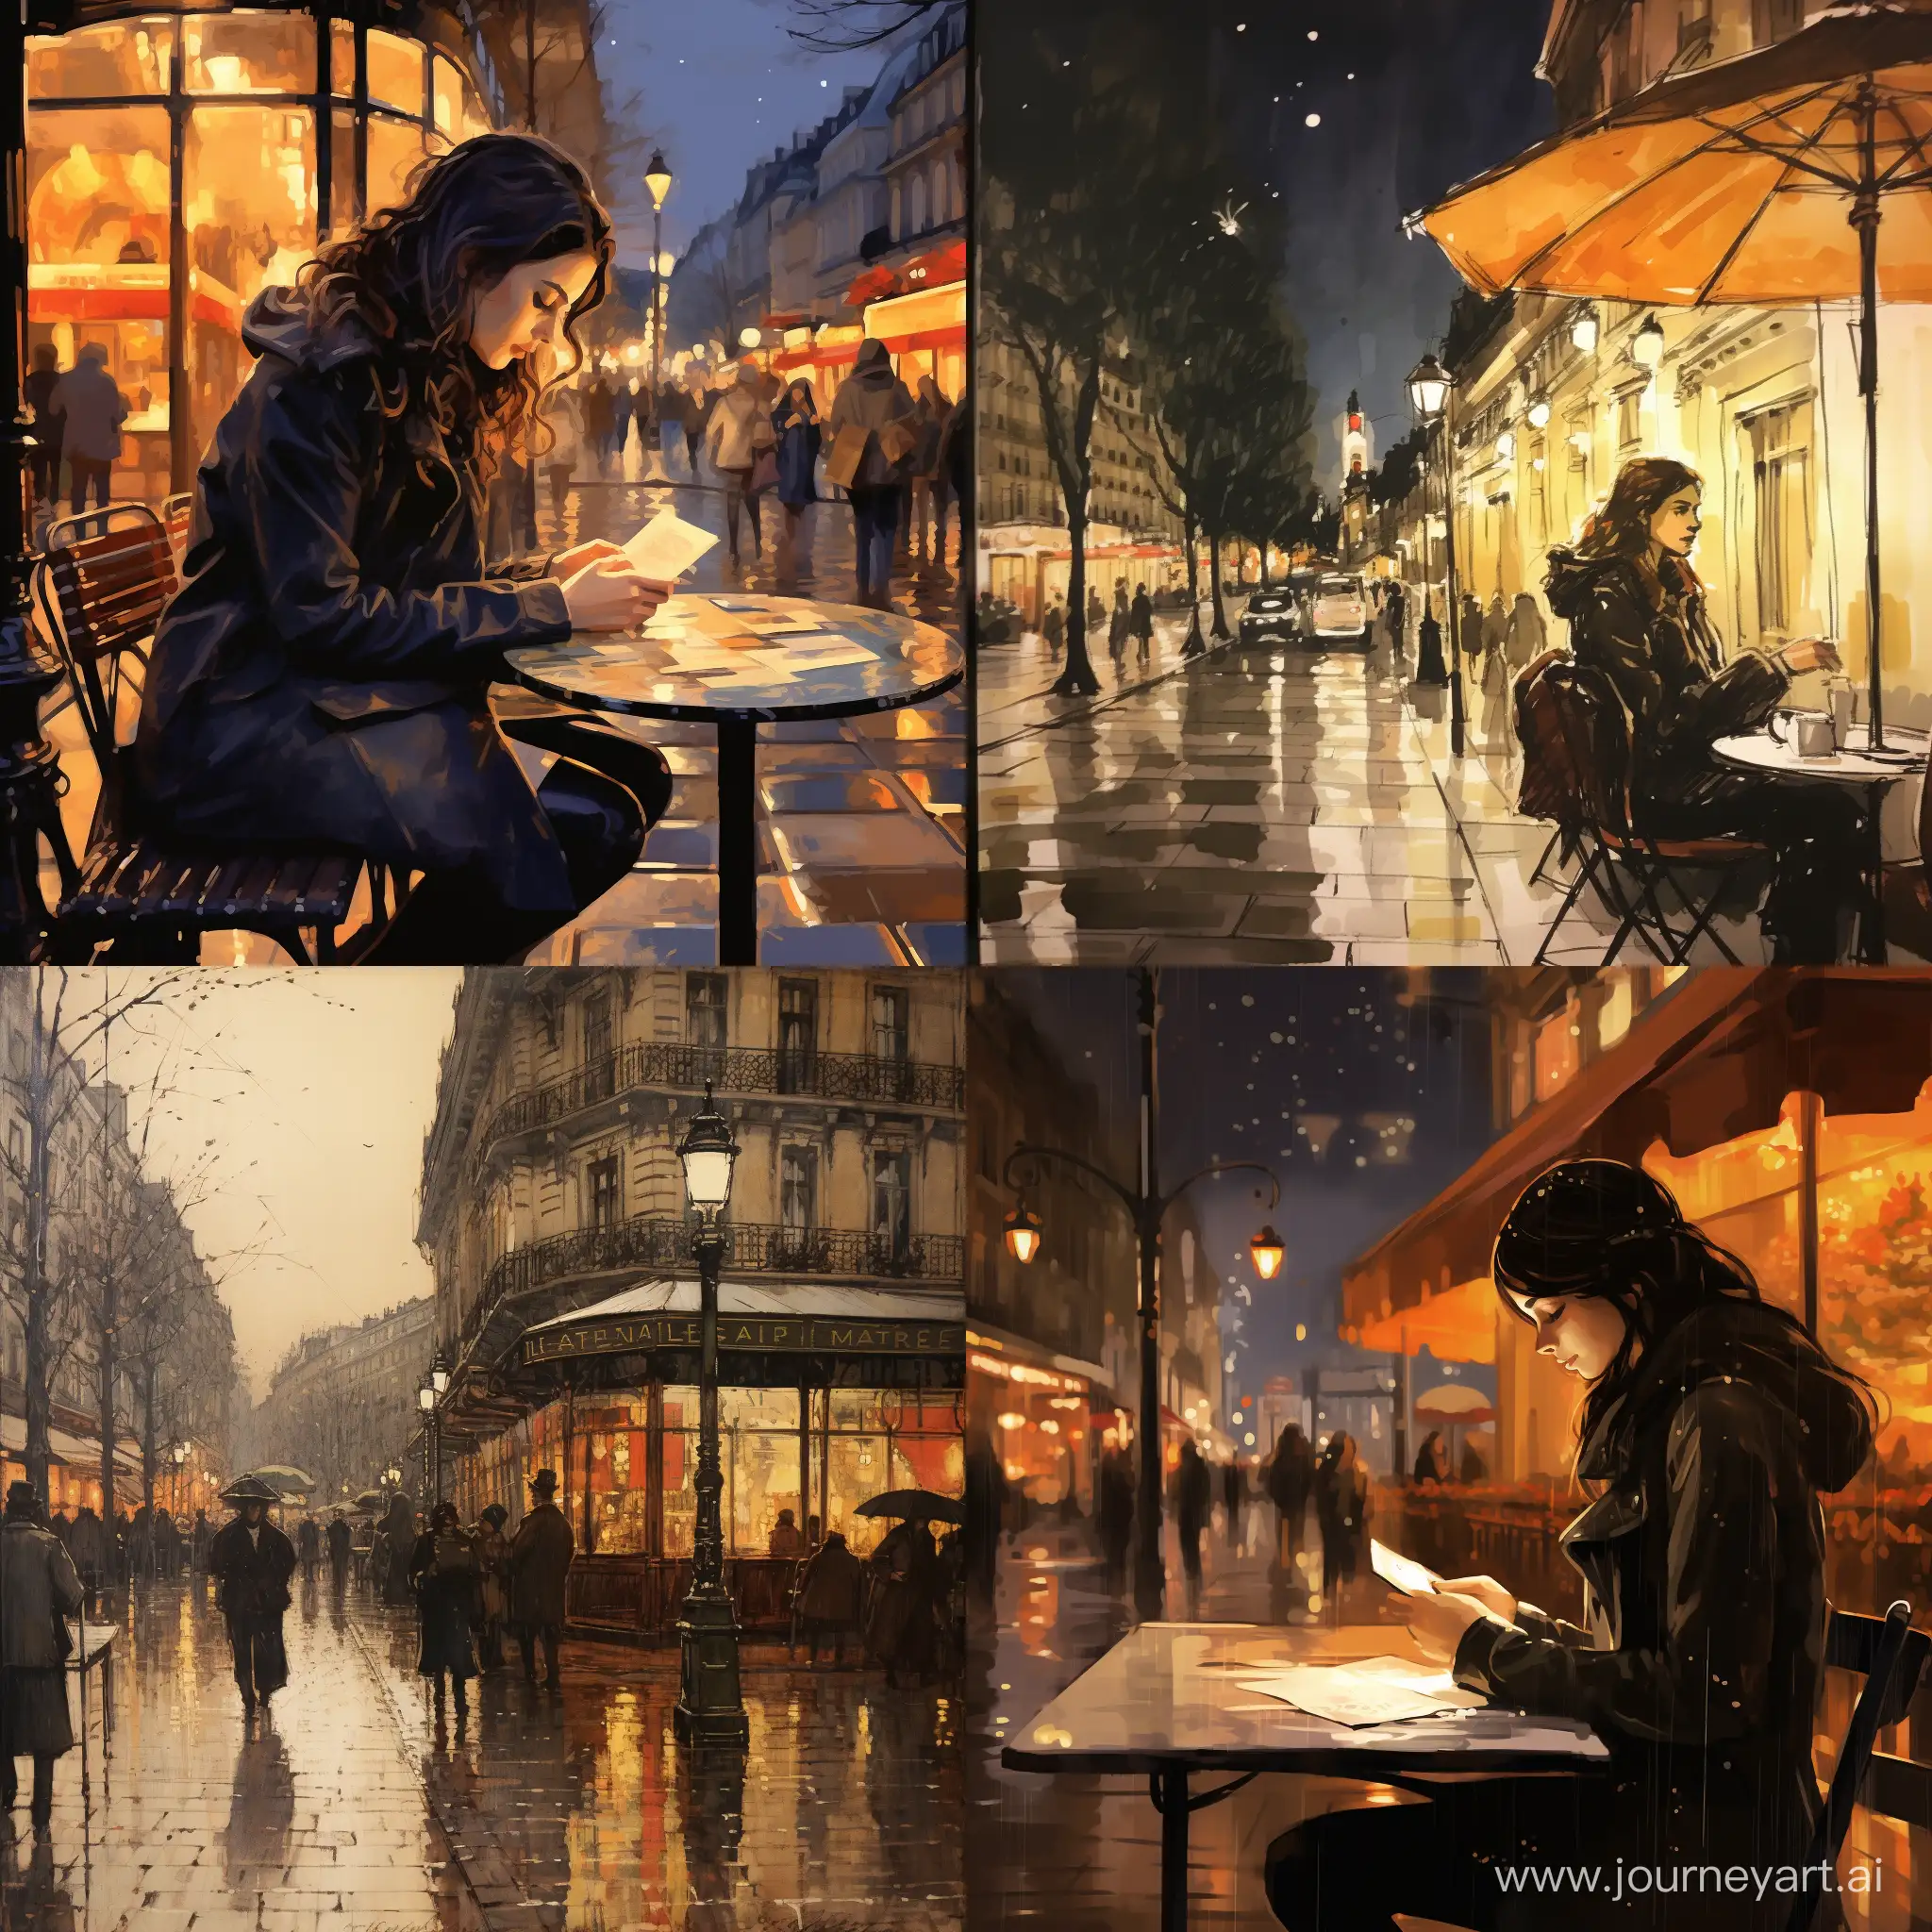 Image: A bustling Parisian street corner, rain-slicked cobblestones reflecting the warm glow of streetlamps. A cafe's awning shelters a young woman, AMY (20s), sketching in a notebook, her brow furrowed in concentration.